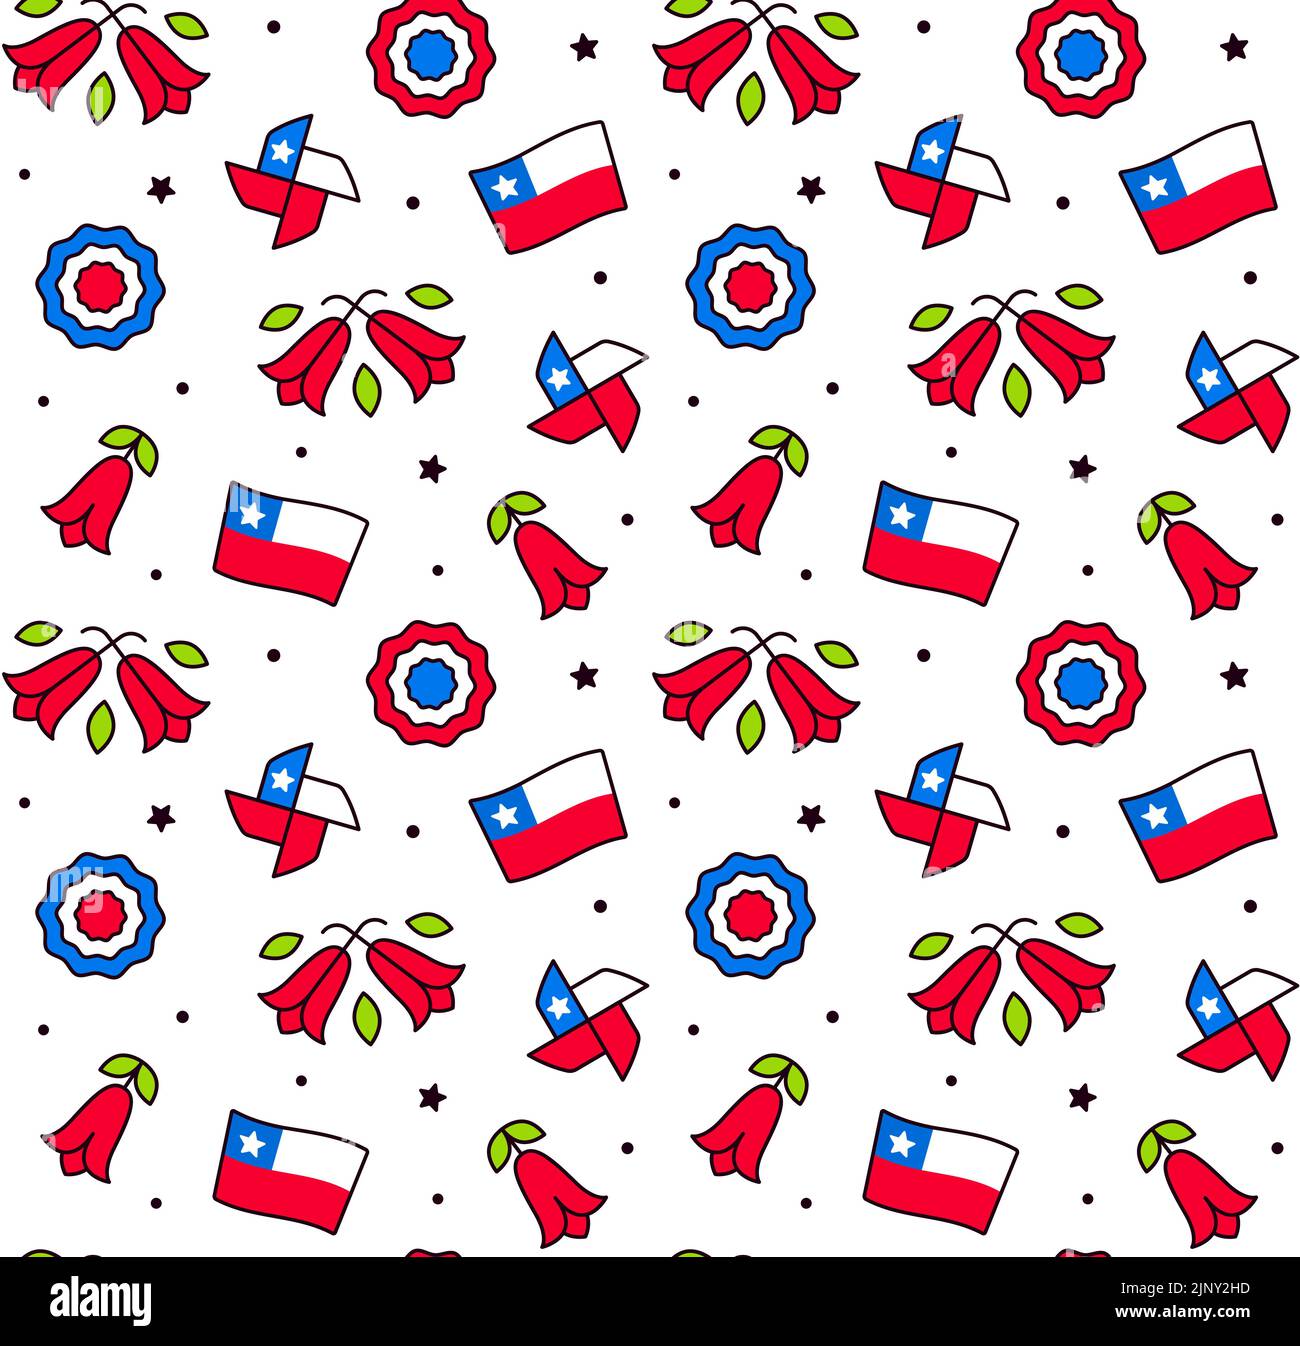 Chile icons seamless pattern. Traditional Chilean national symbols for Fiestas Patrias (Dieciocho) Independence Day of Chile. Cute and simple cartoon Stock Vector